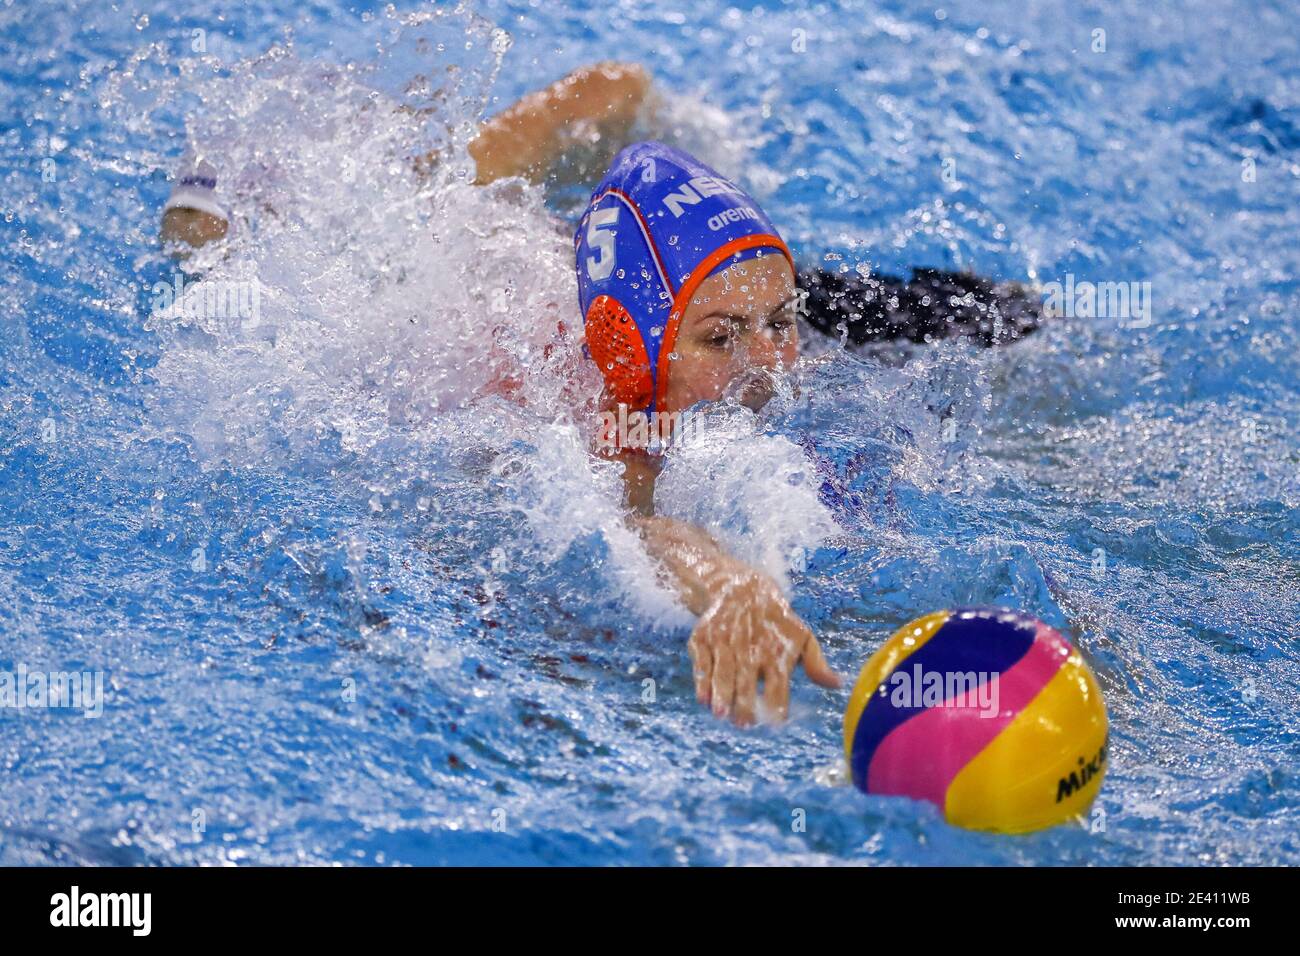 Trieste, Italy. 21st Jan, 2021. TRIESTE, ITALY - JANUARY 21: Iris Wolves of Netherlands during the match between France and The Netherlands at Women's Water Polo Olympic Games Qualification Tournament at Bruno Bianchi Aquatic Center on January 21, 2021 in Trieste, Italy (Photo by Marcel ter Bals/Orange Pictures/Alamy Live News) Stock Photo